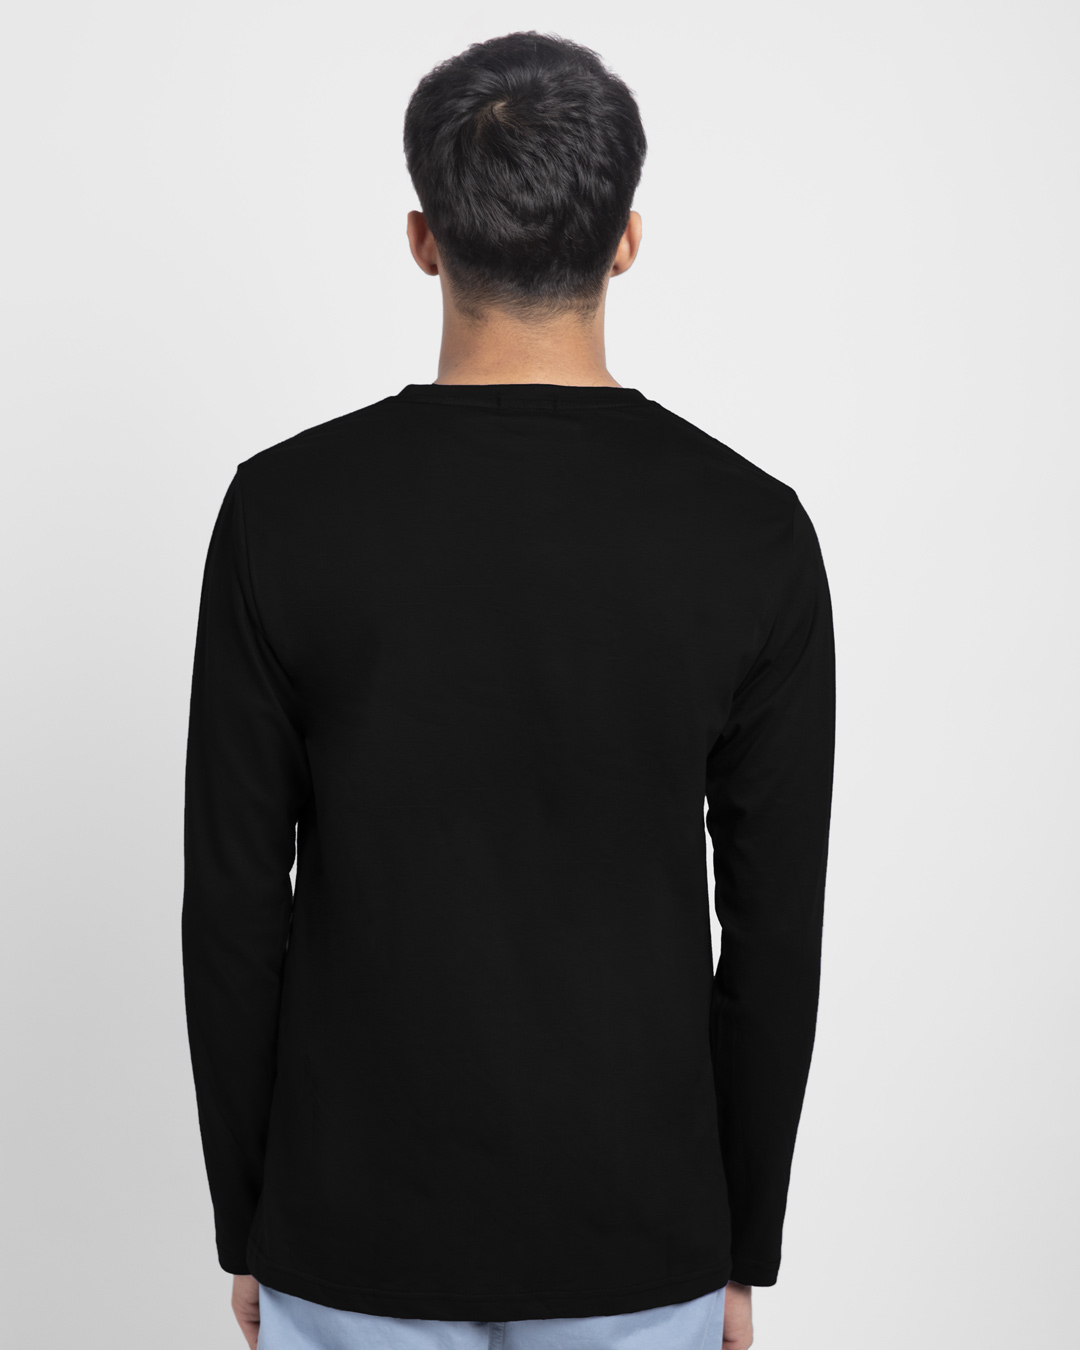 Shop Smart Is The New Cool Full Sleeve T-Shirt Black-Back